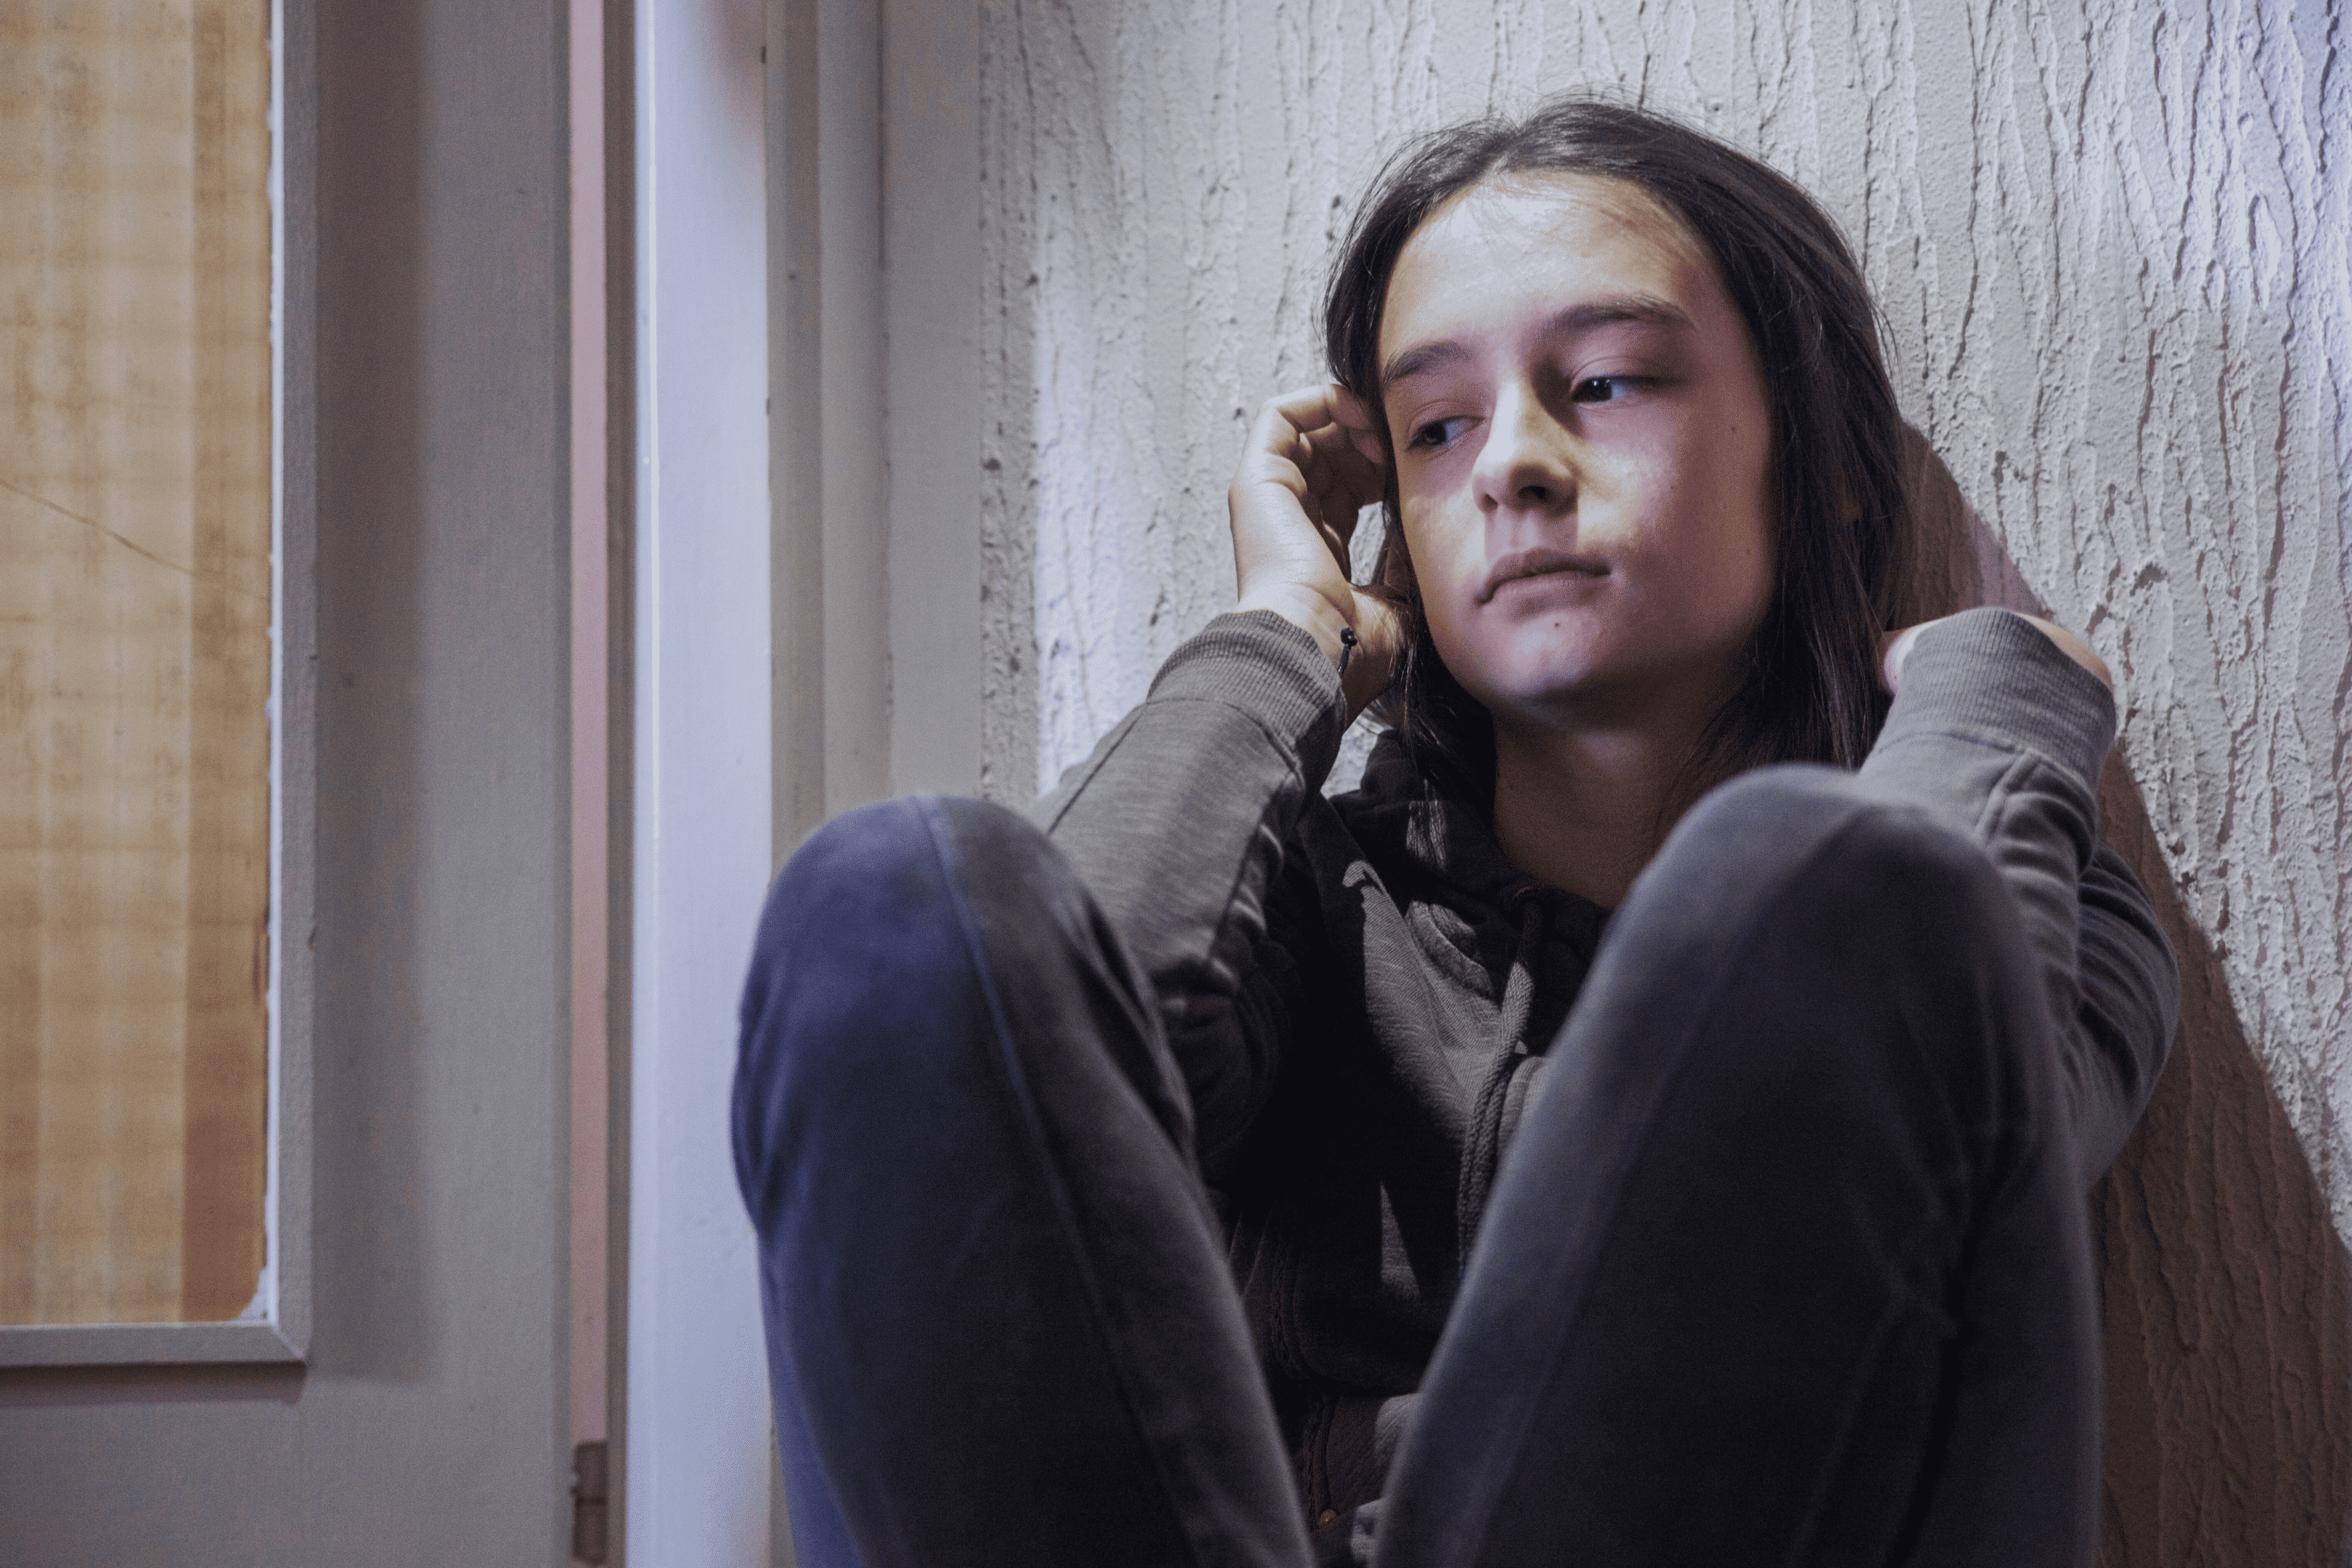 Research shows teen ptsd should be addressed by a issue specific healthcare provider rather than and child's pediatrician.